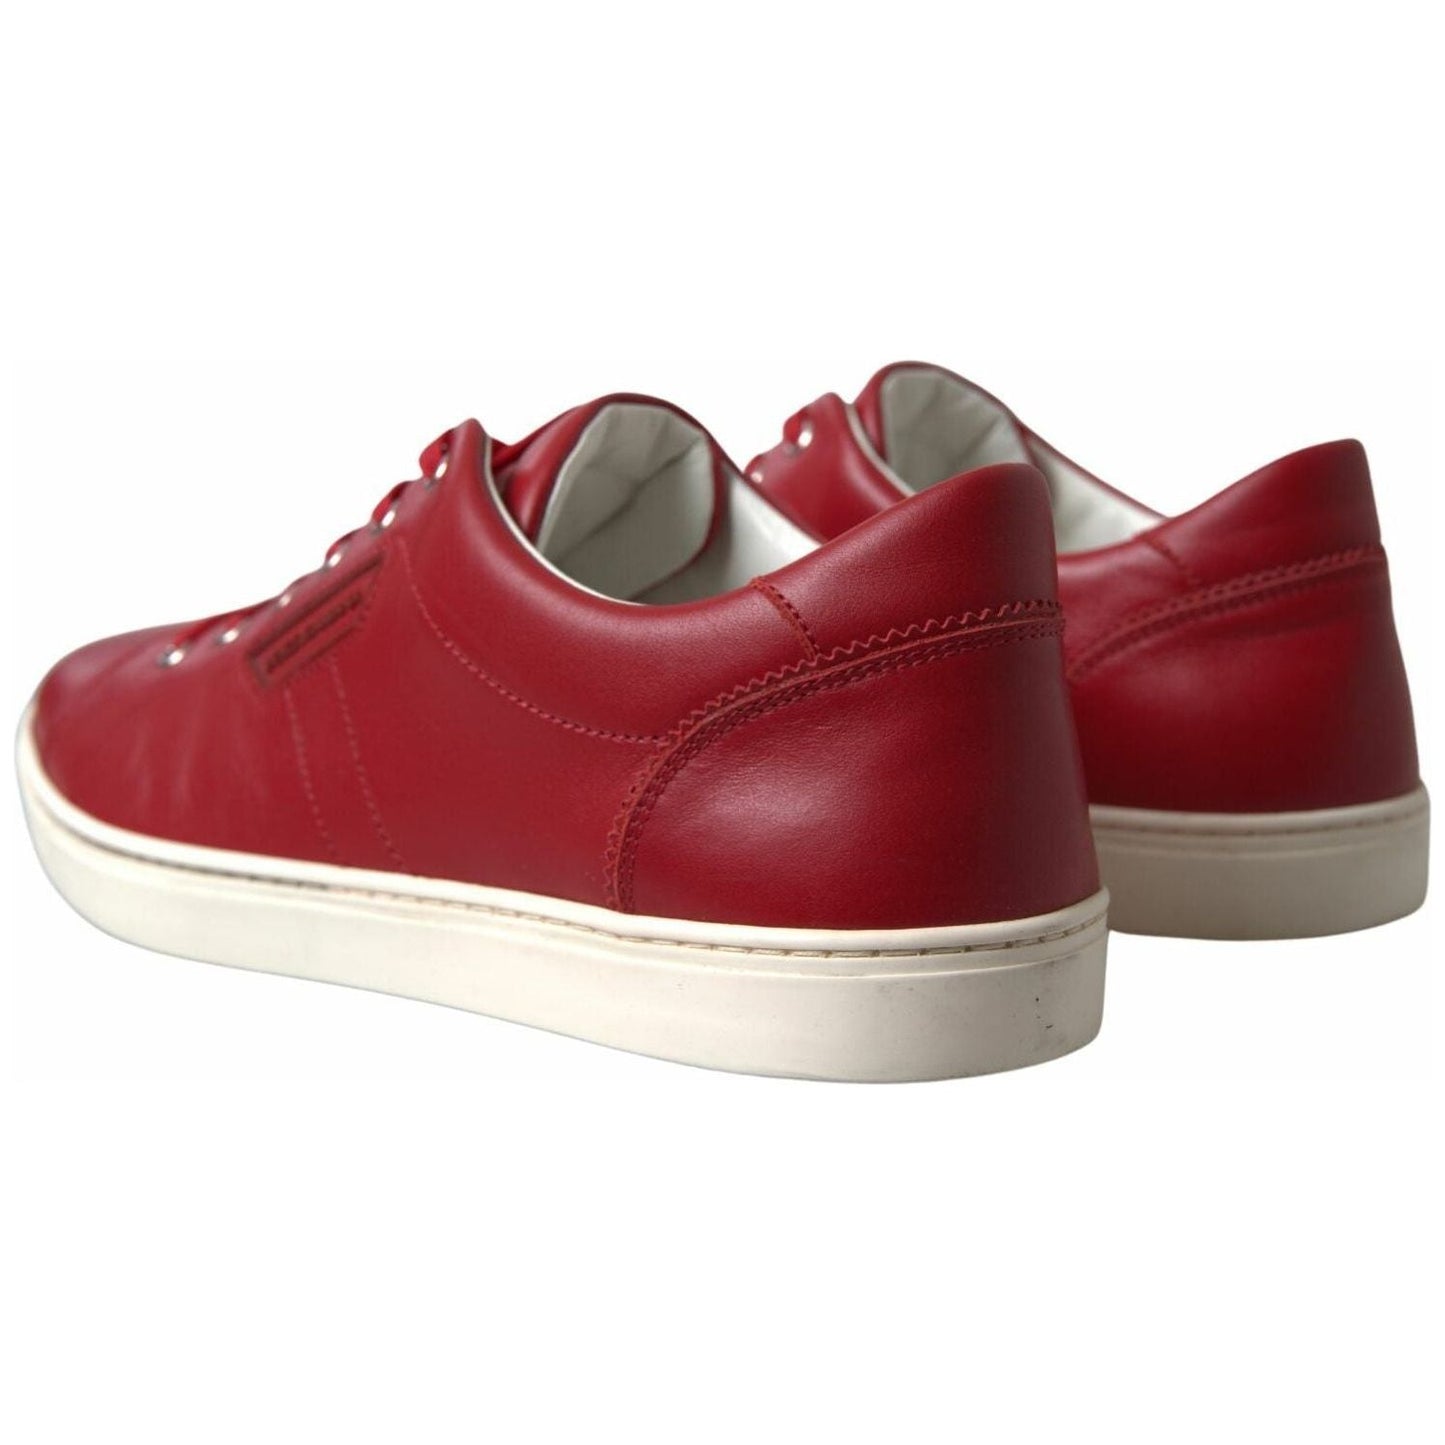 Dolce & Gabbana Elegant Red Leather Low Top Sneakers shoes-red-portofino-leather-low-top-mens-sneakers 3-scaled-658eab1d-1c1.jpg